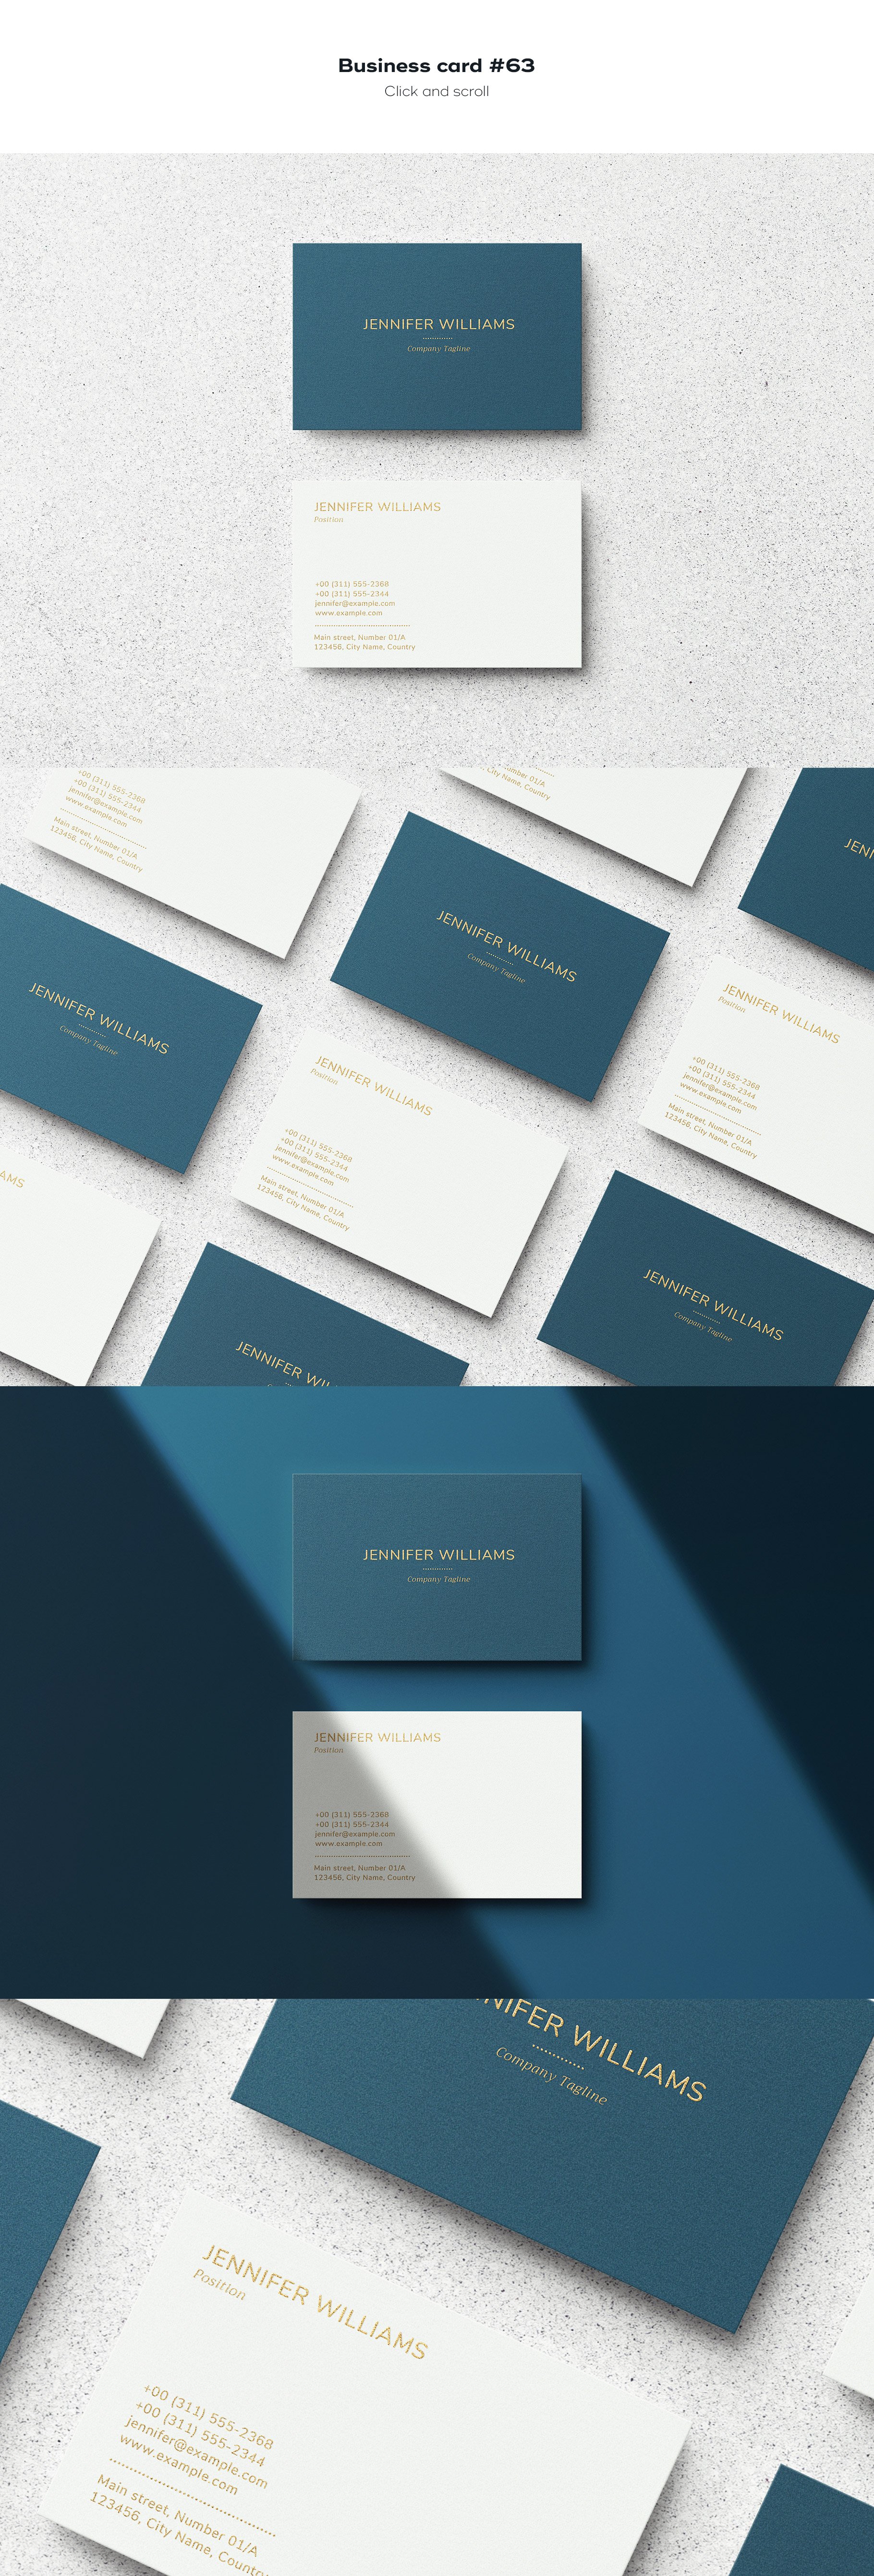 business card 63 835